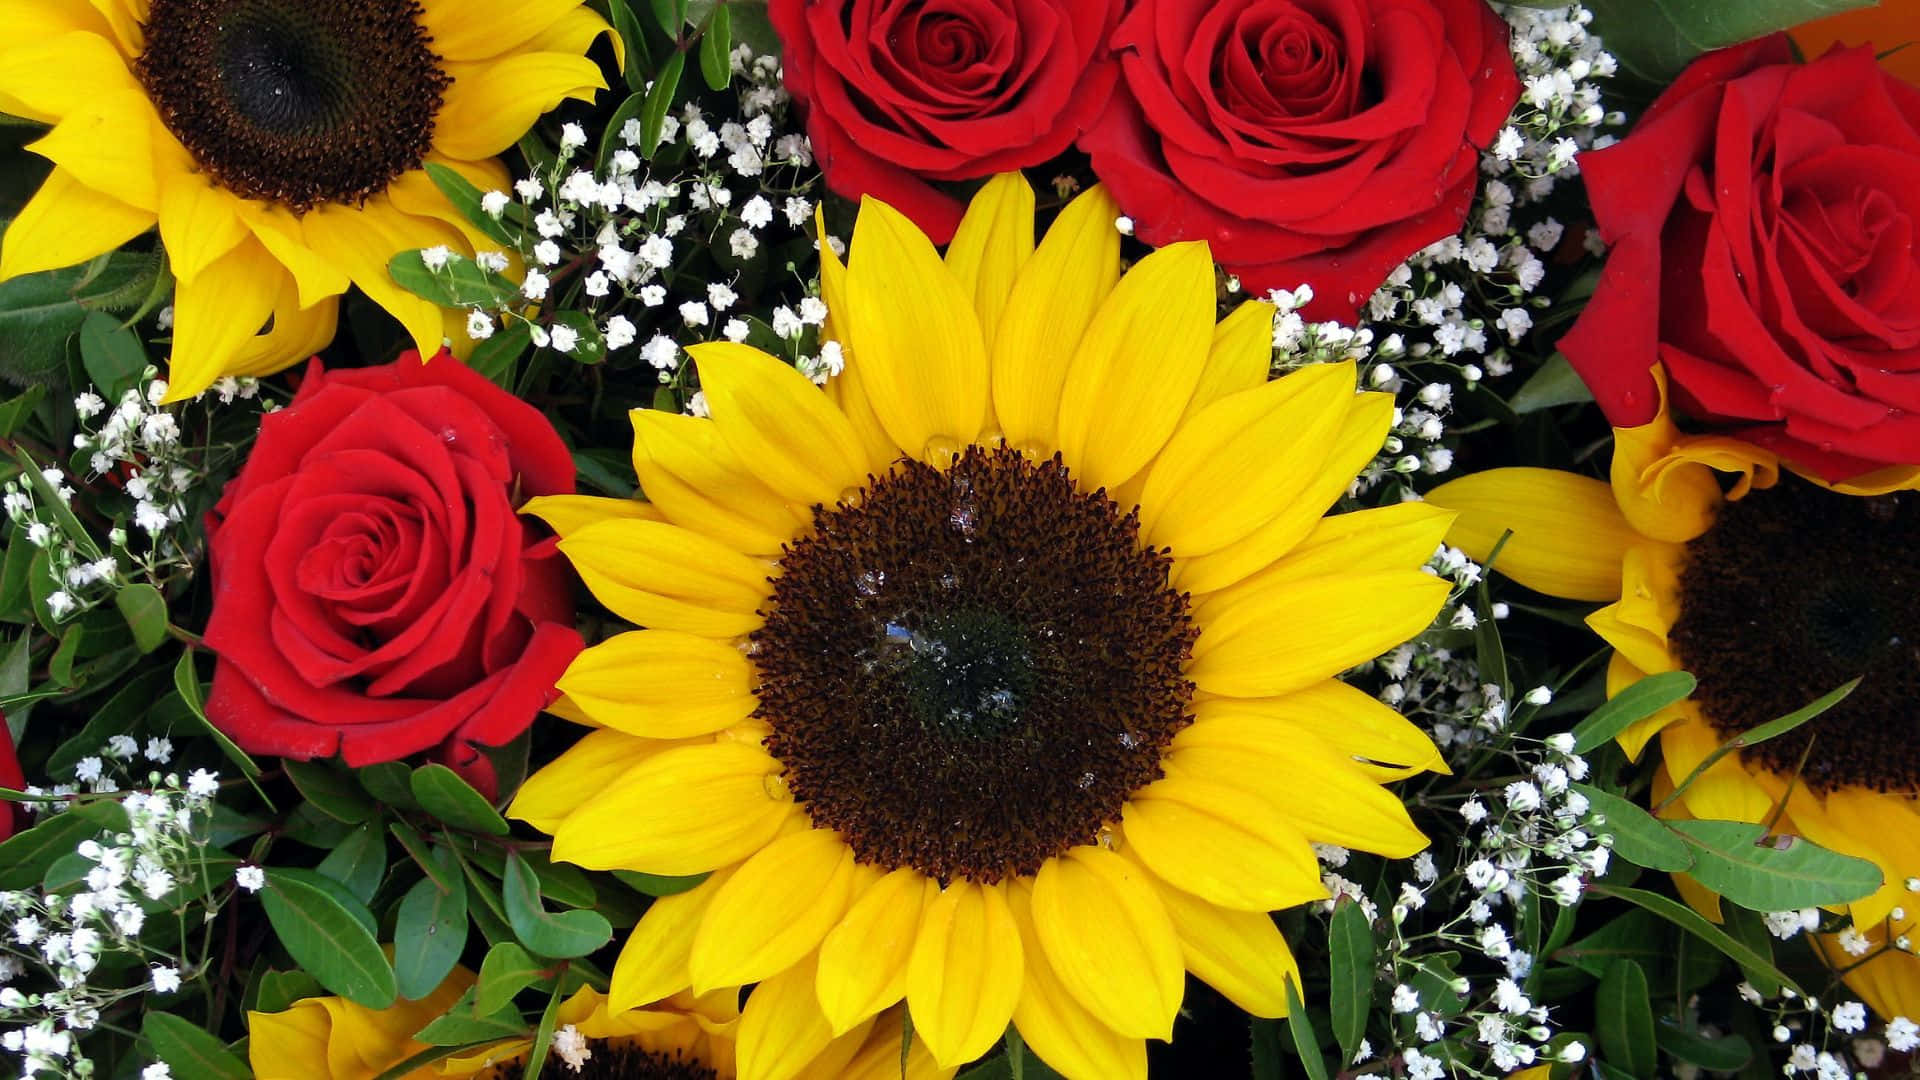 Sunflowers And Roses Background Wallpaper